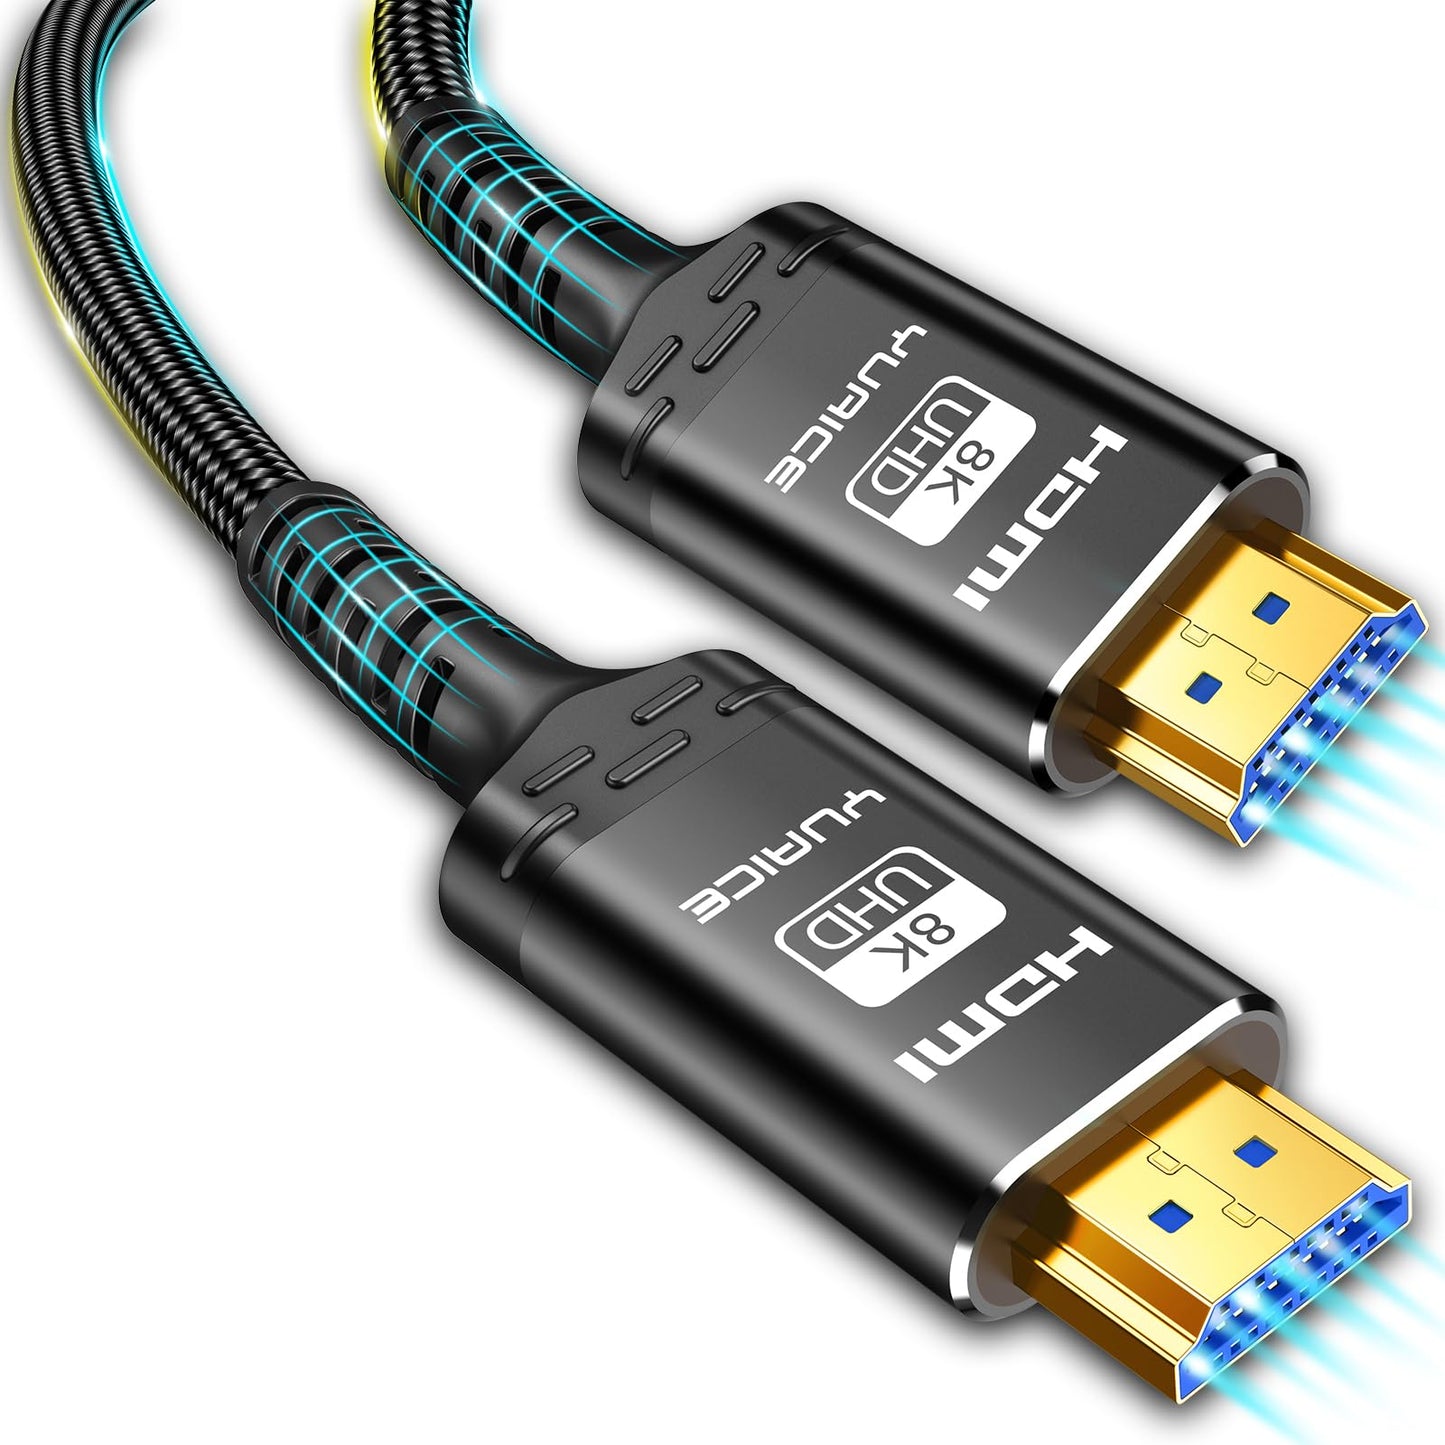 10K 8K HDMI Cable 2.1 - Available in 1.5FT, 3FT, 6FT, 10FT, 15FT Lengths, Heavy Duty High-Speed Braided HDMI Cable with 48Gbps, Professional HDMI Cord, HDR Support (8K-1.5FT)